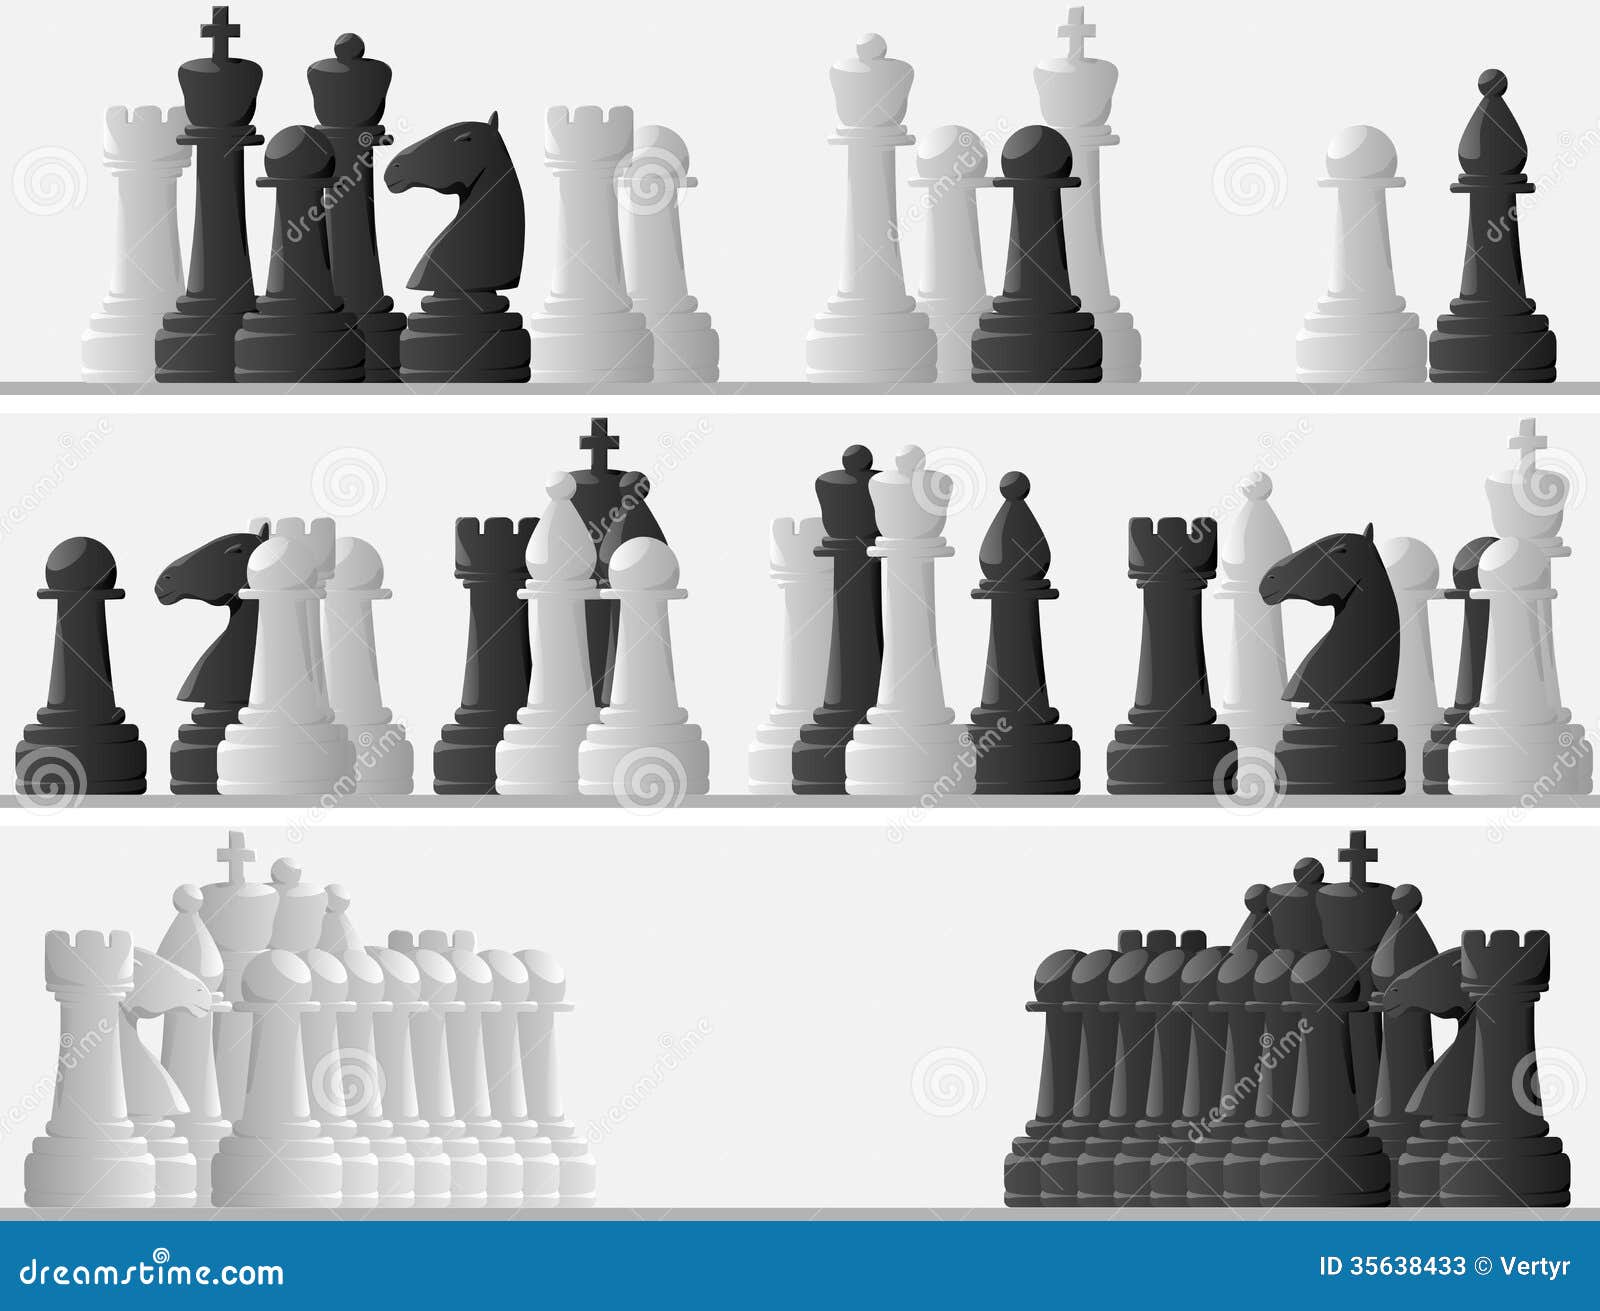 Set Banners Of Black And White Chess Pieces. Stock Photos ...